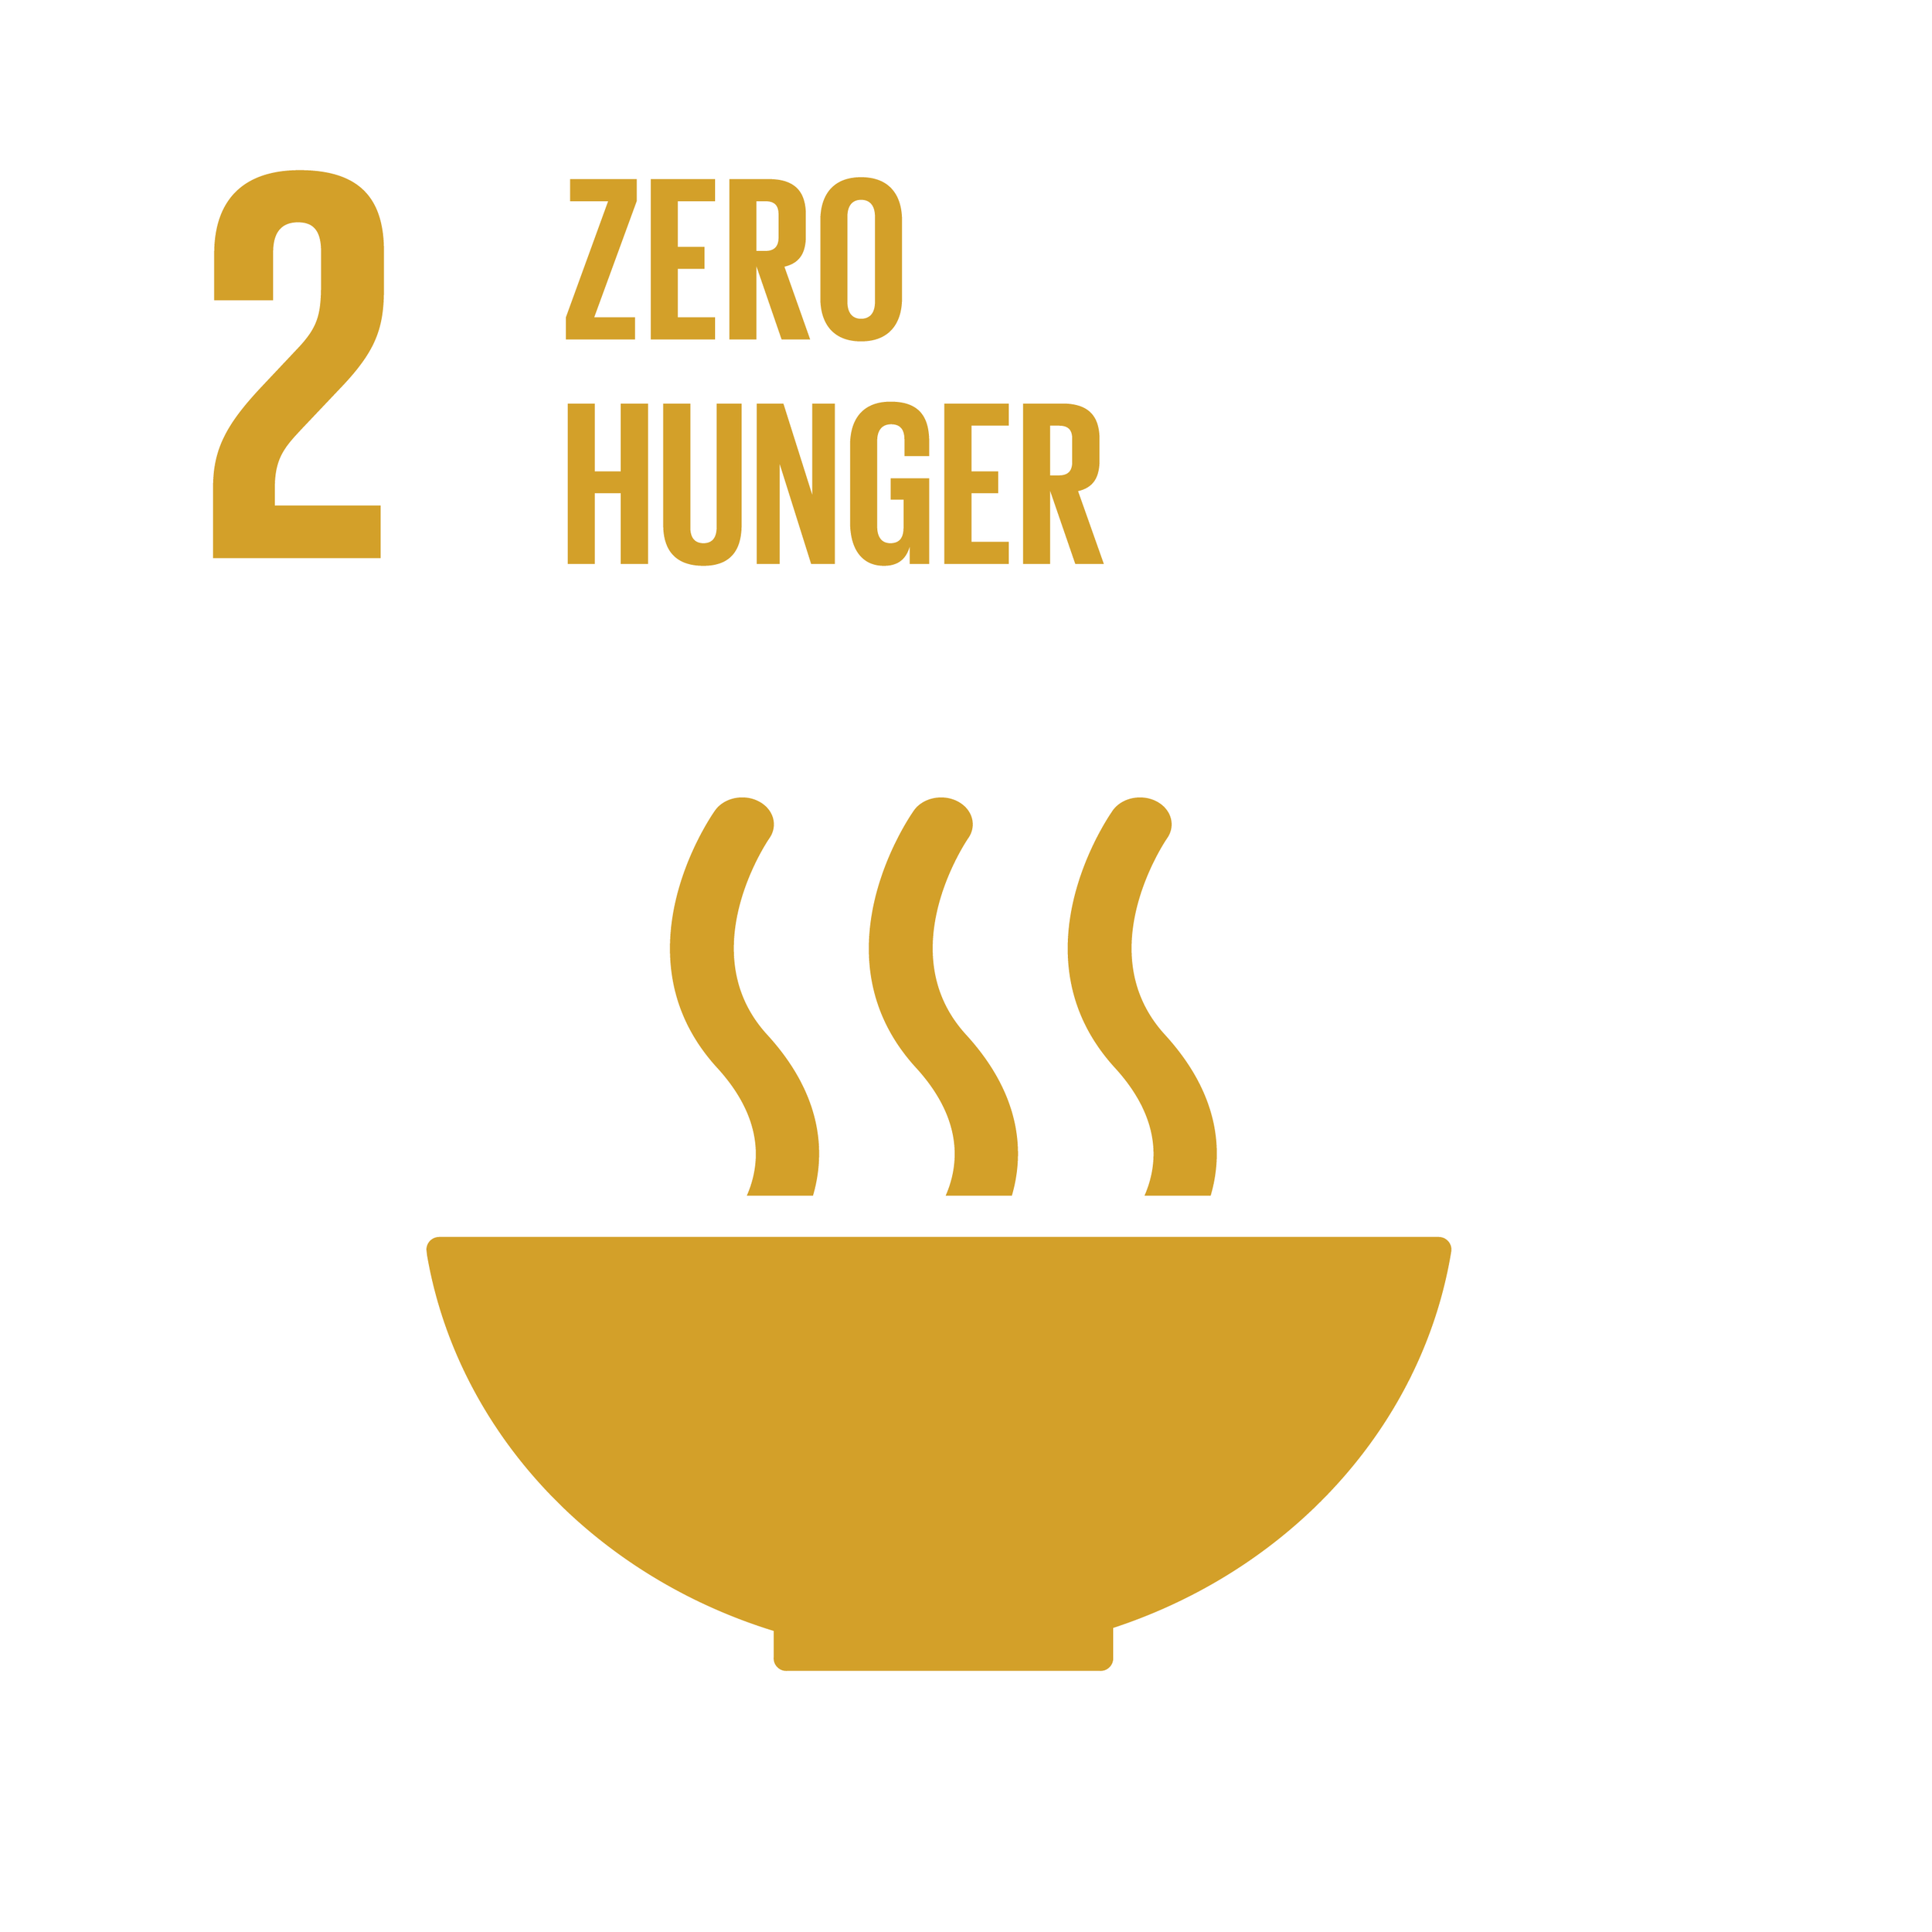 E_INVERTED SDG goals_icons-individual-RGB-02.png